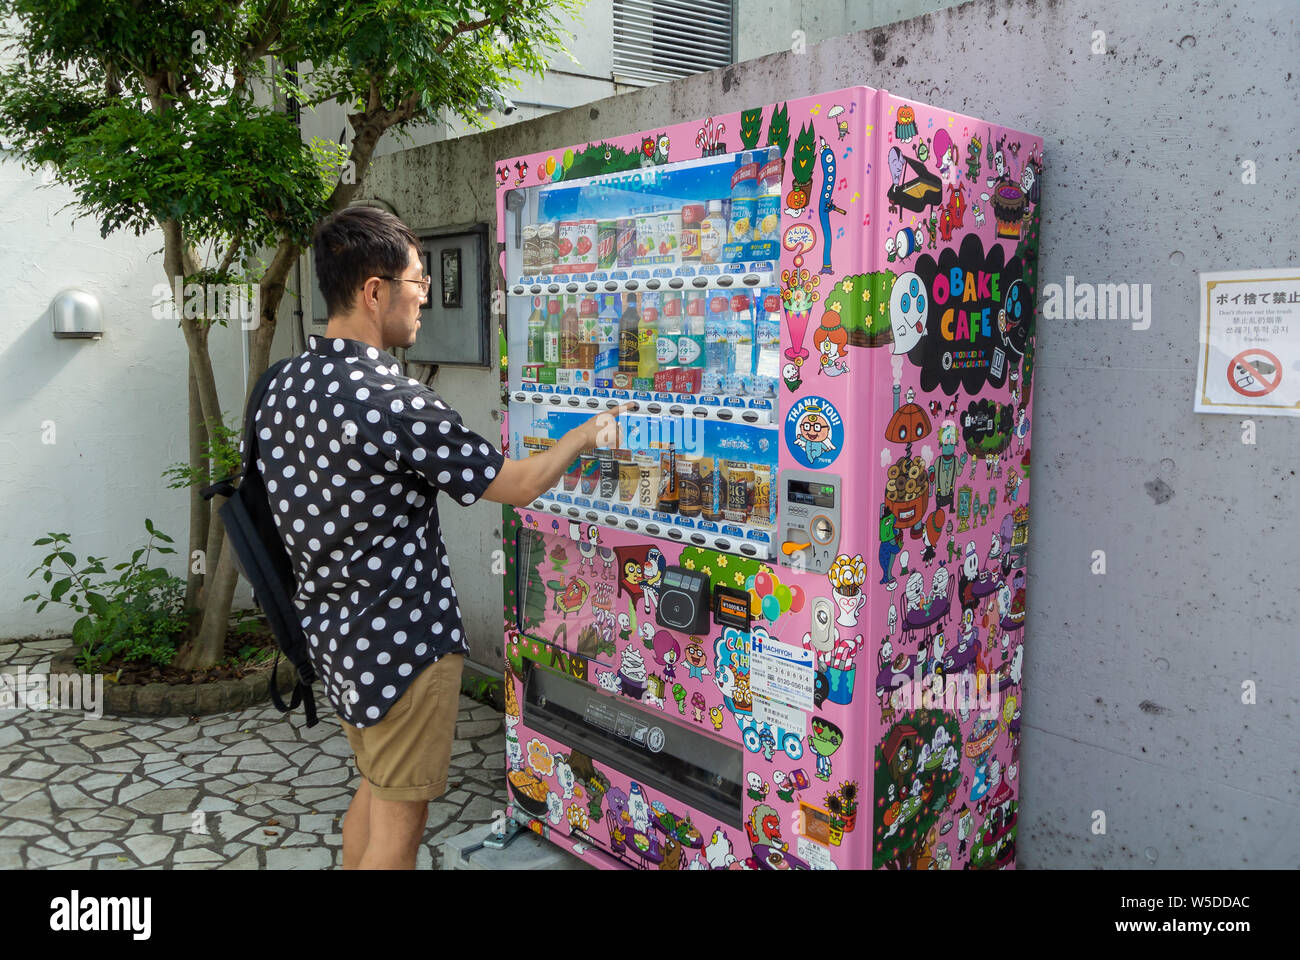 An asian tourist buying a drink from a colorful vending machine, Omotesando, tokyo, japan, 20192019 Stock Photo